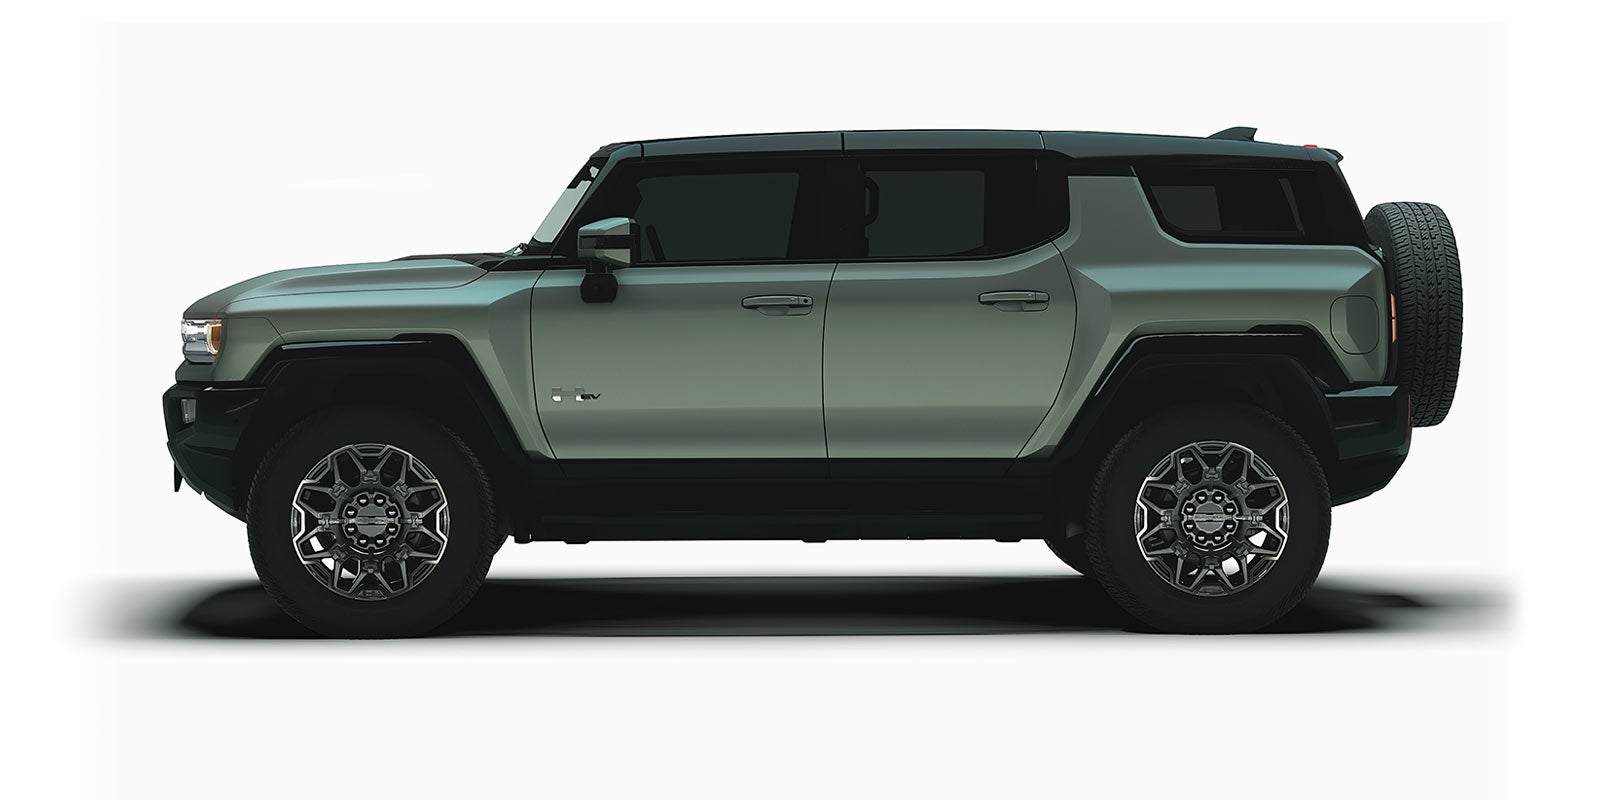 hummer ev pickup and hummer ev | Lewiston Chevrolet Buick GMC in Lewiston ID